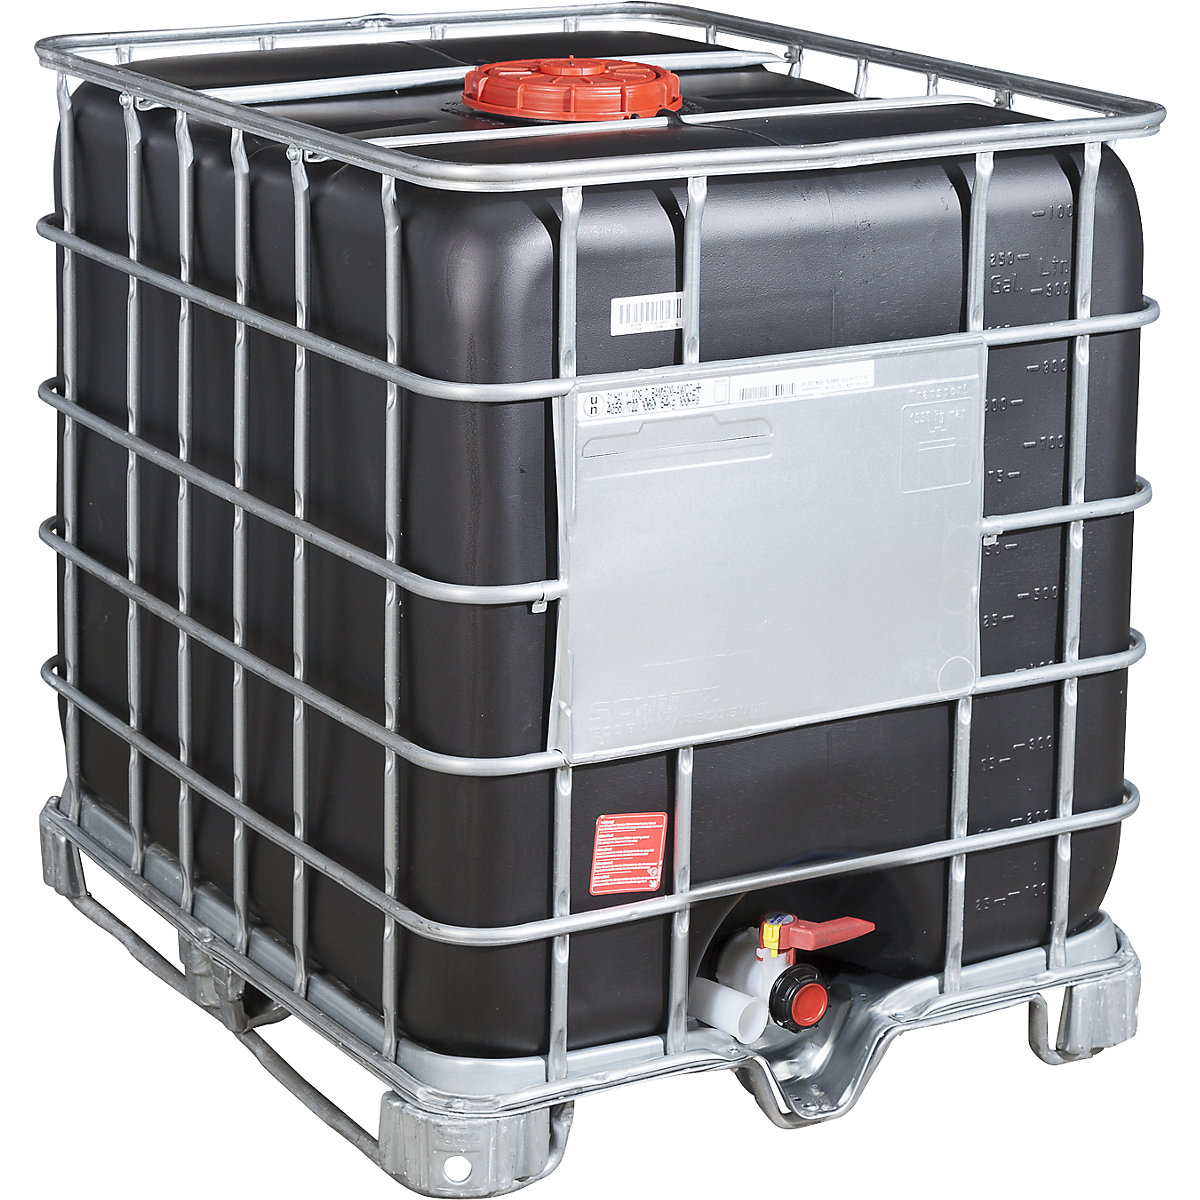 RECOBULK IBC container with UV protection, UN approval